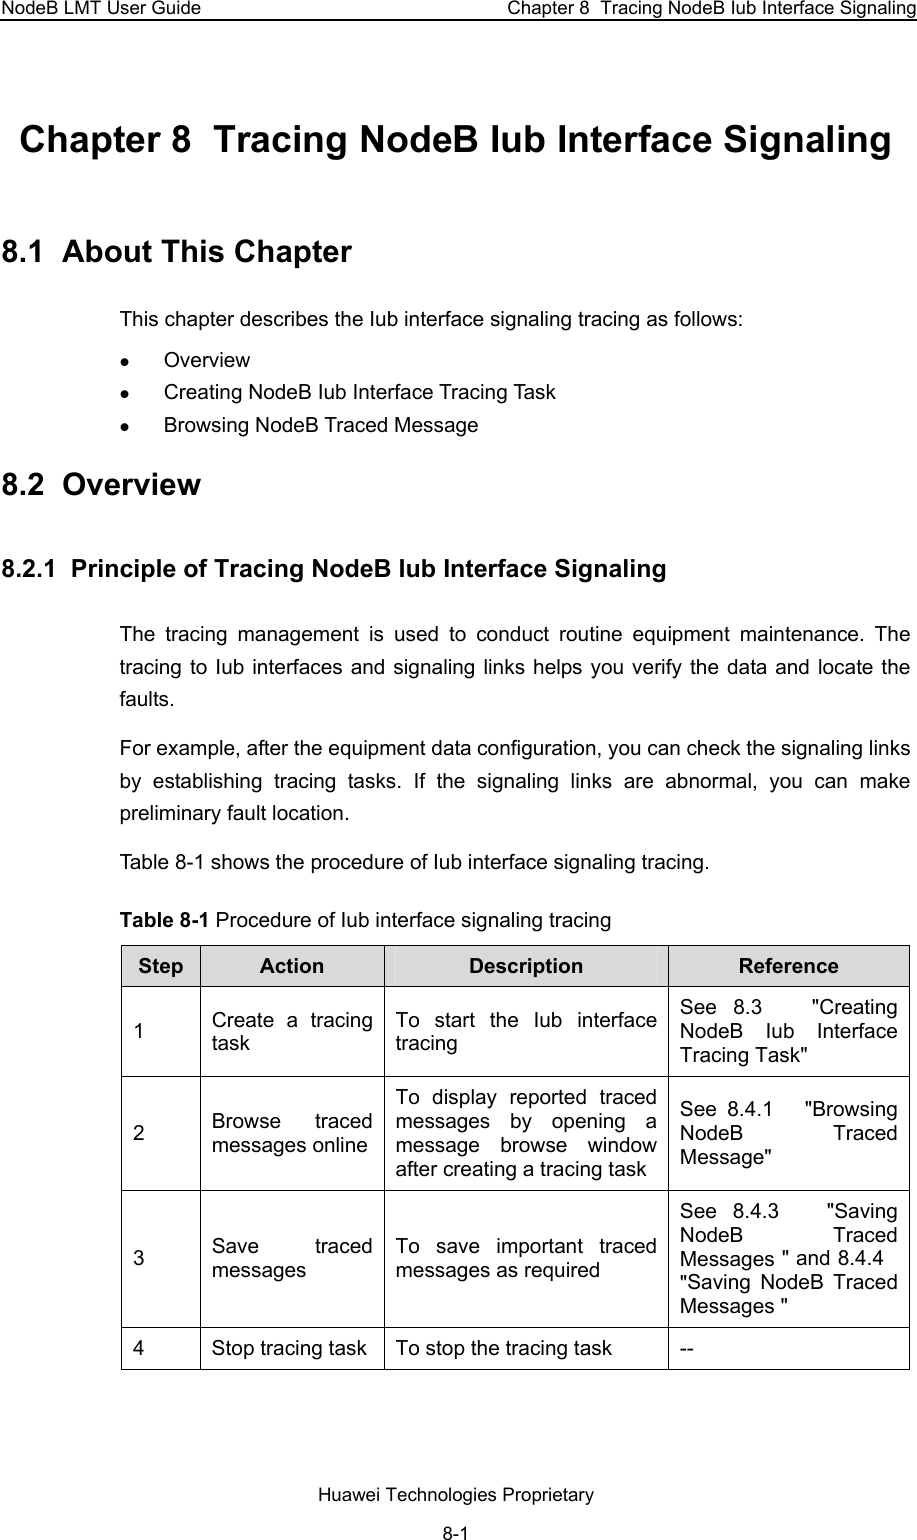 NodeB LMT User Guide  Chapter 8  Tracing NodeB Iub Interface Signaling Chapter 8  Tracing NodeB Iub Interface Signaling 8.1  About This Chapter This chapter describes the Iub interface signaling tracing as follows: z Overview z Creating NodeB Iub Interface Tracing Task z Browsing NodeB Traced Message 8.2  Overview 8.2.1  Principle of Tracing NodeB Iub Interface Signaling  The tracing management is used to conduct routine equipment maintenance. The tracing to Iub interfaces and signaling links helps you verify the data and locate the faults. For example, after the equipment data configuration, you can check the signaling links by establishing tracing tasks. If the signaling links are abnormal, you can make preliminary fault location.  Table 8-1 shows the procedure of Iub interface signaling tracing. Table 8-1 Procedure of Iub interface signaling tracing Step  Action   Description   Reference 1  Create a tracing task  To start the Iub interface tracing See  8.3   &quot;Creating NodeB Iub Interface Tracing Task&quot; 2  Browse traced messages onlineTo display reported traced messages by opening a message browse window after creating a tracing task See  8.4.1   &quot;Browsing NodeB Traced Message&quot; 3  Save traced messages To save important traced messages as required See  8.4.3   &quot;Saving NodeB Traced Messages &quot; and 8.4.4   &quot;Saving NodeB Traced Messages &quot; 4  Stop tracing task  To stop the tracing task  -- Huawei Technologies Proprietary 8-1 